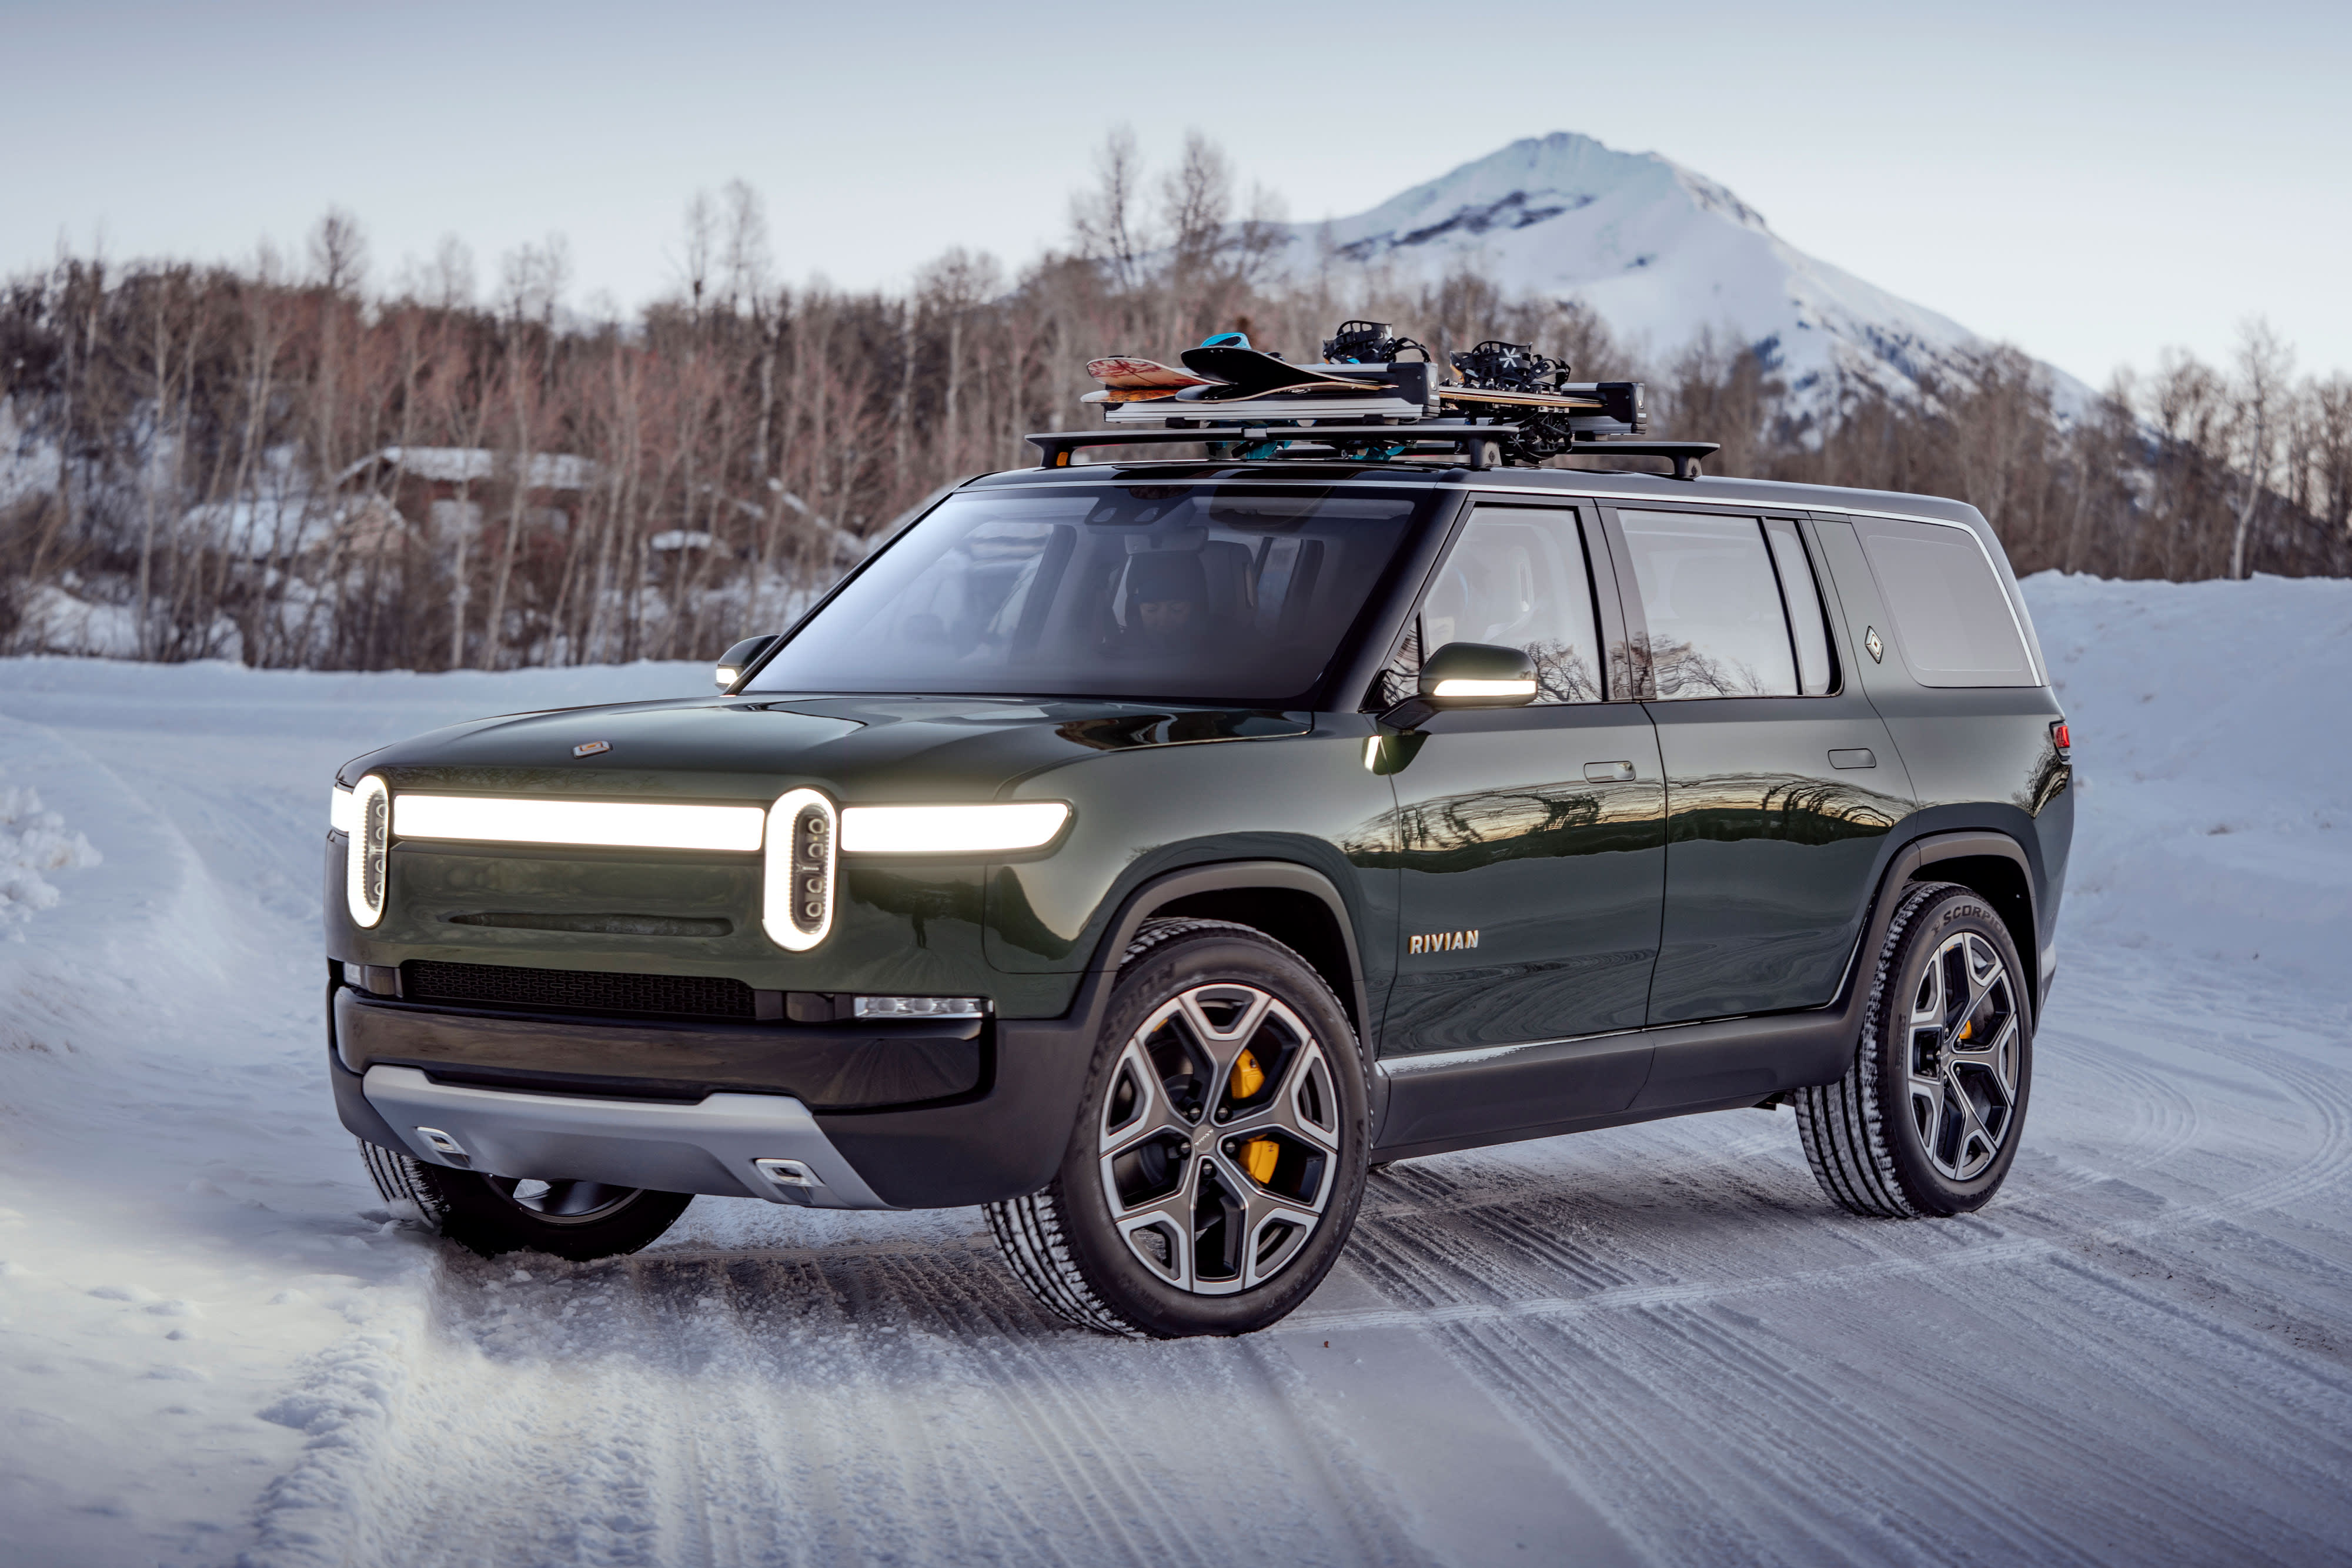 EV Rivian start-up raises $ 2.65 billion in new round of funding led by T. Rowe Price